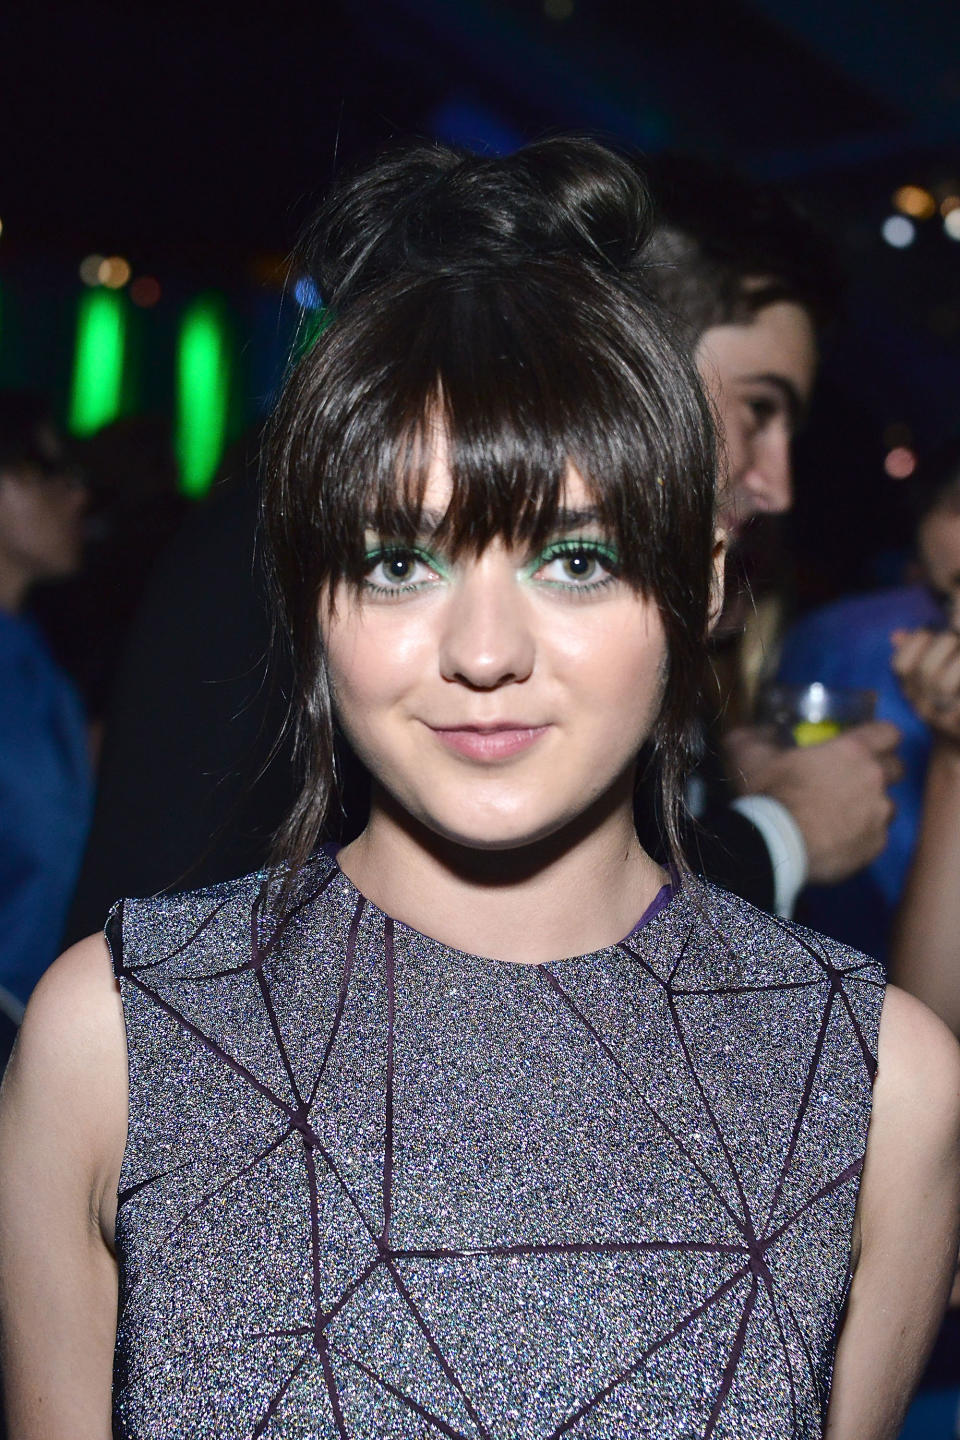 Maisie Williams&nbsp;inside&nbsp;HBO's Emmys after-party in West Hollywood on Sept. 18.&nbsp;